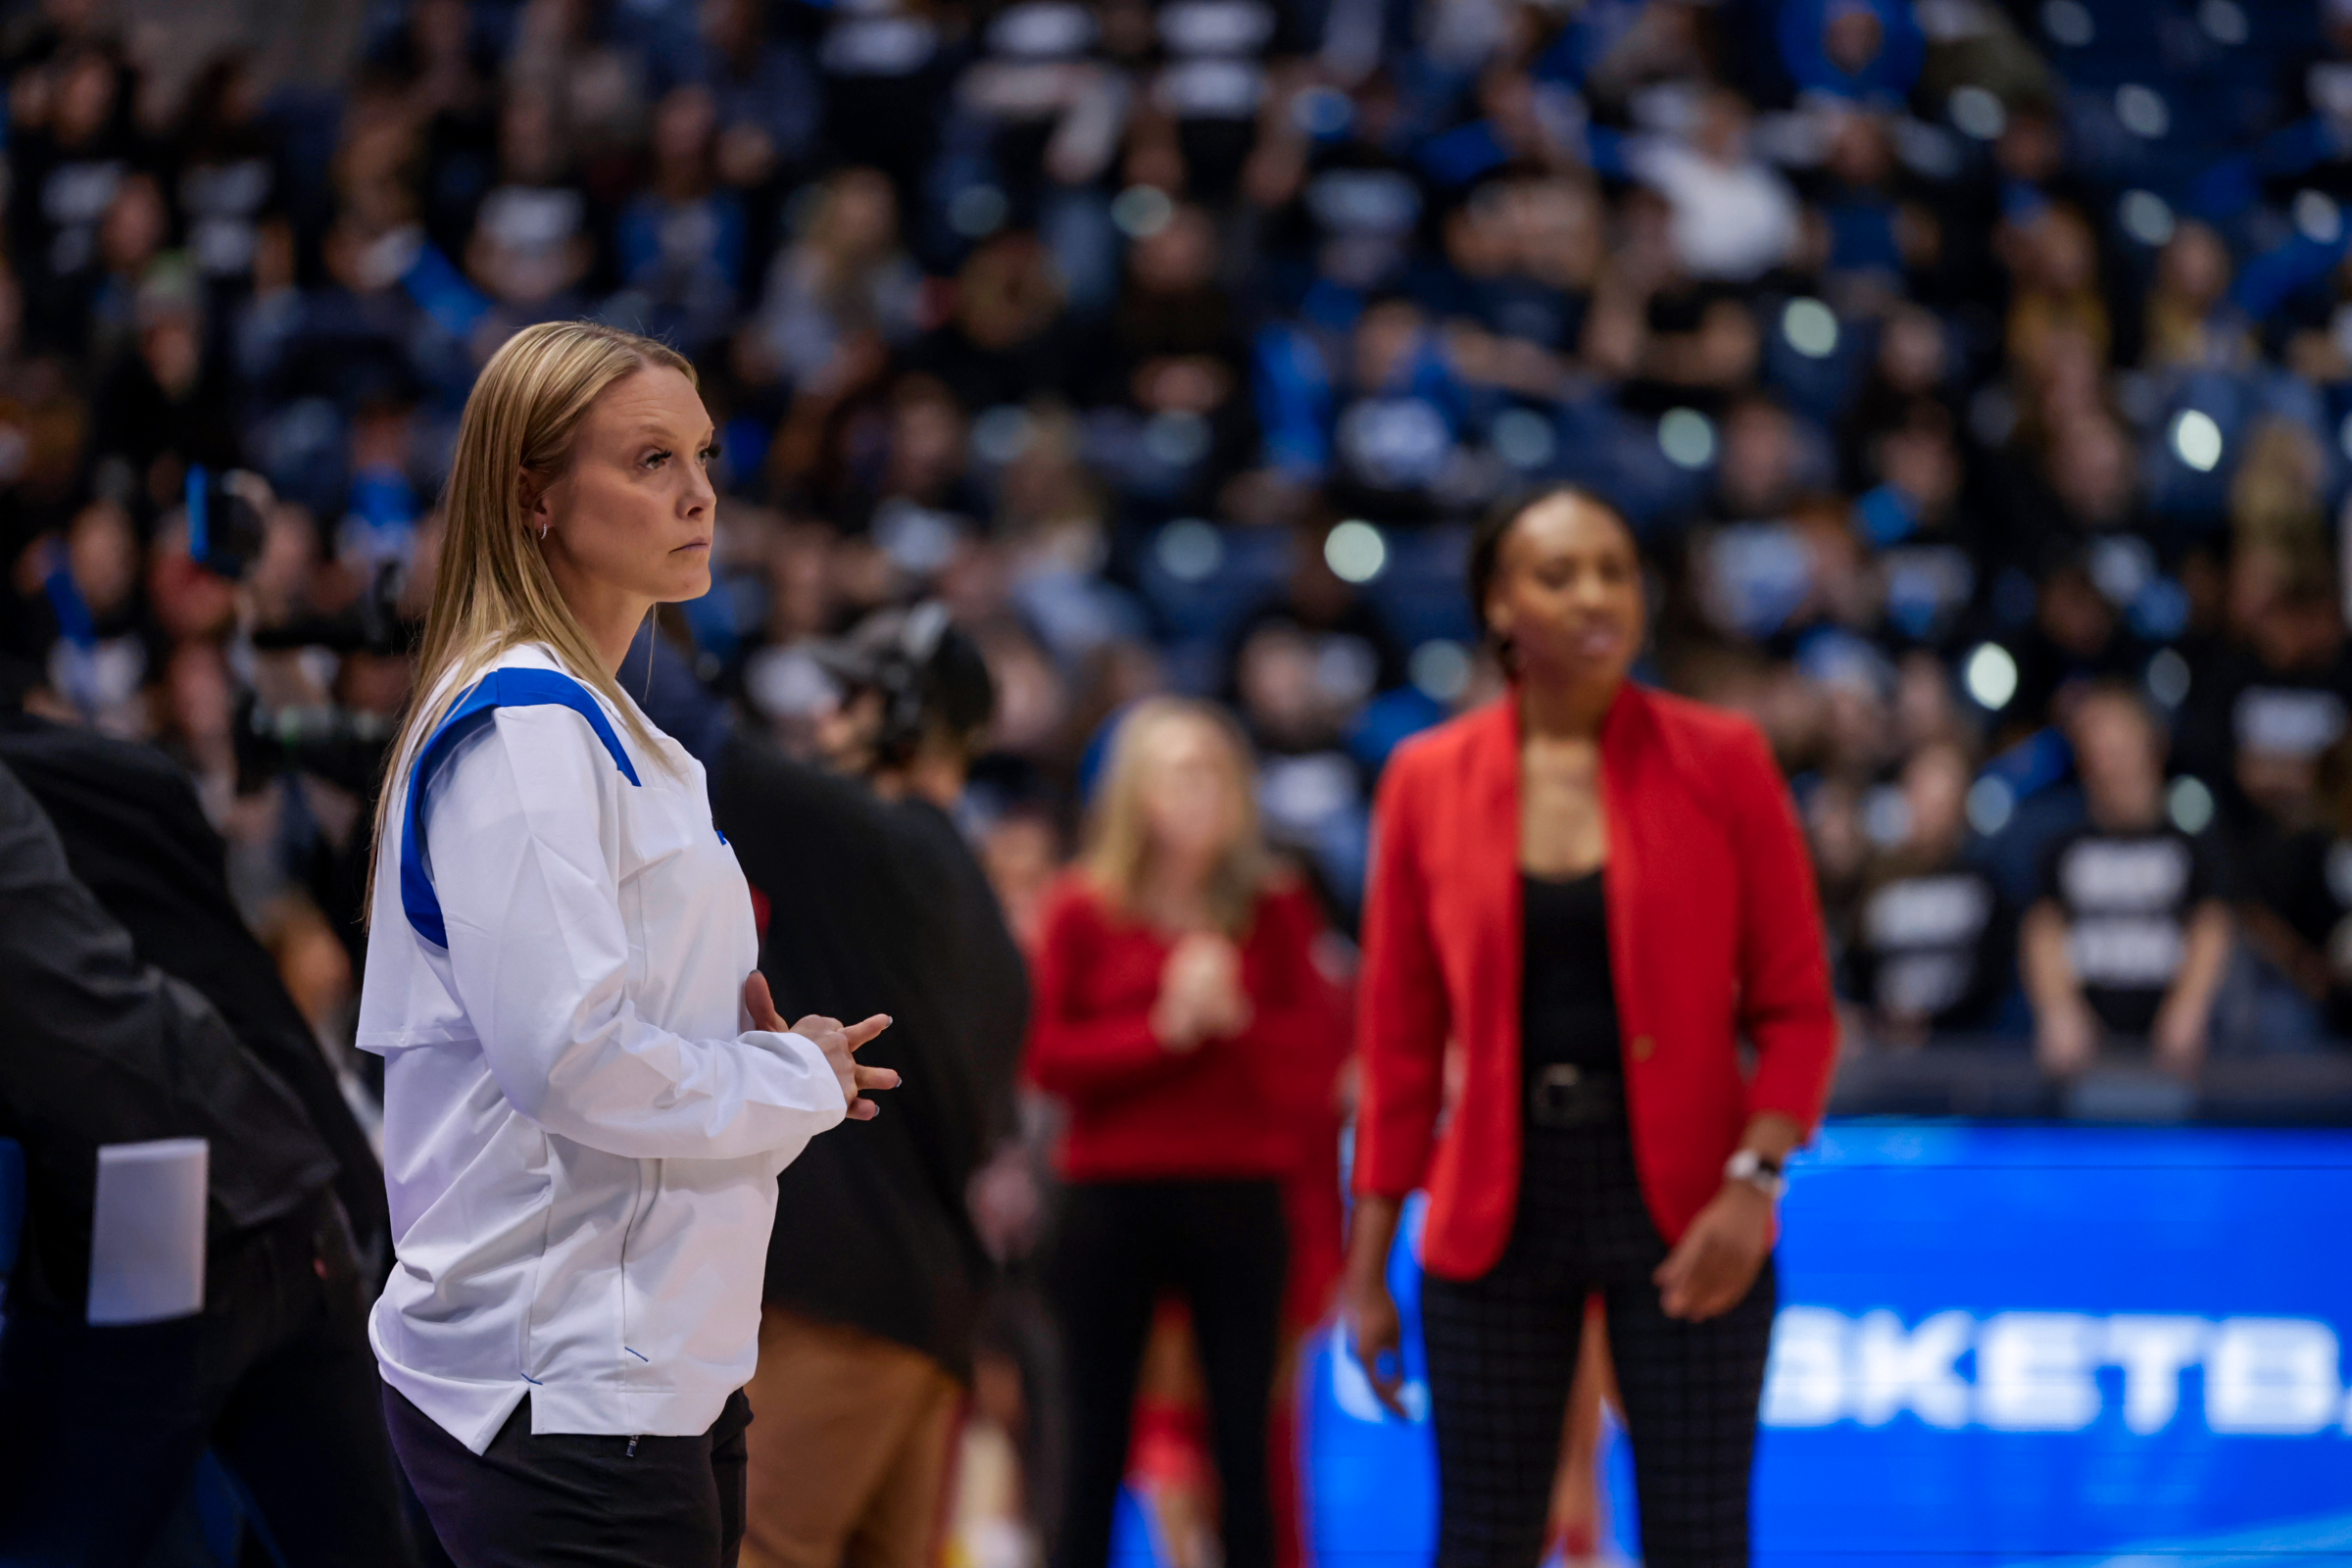 BYU head coach Amber Whiting looks on during a game against Utah on December 10, 2022.